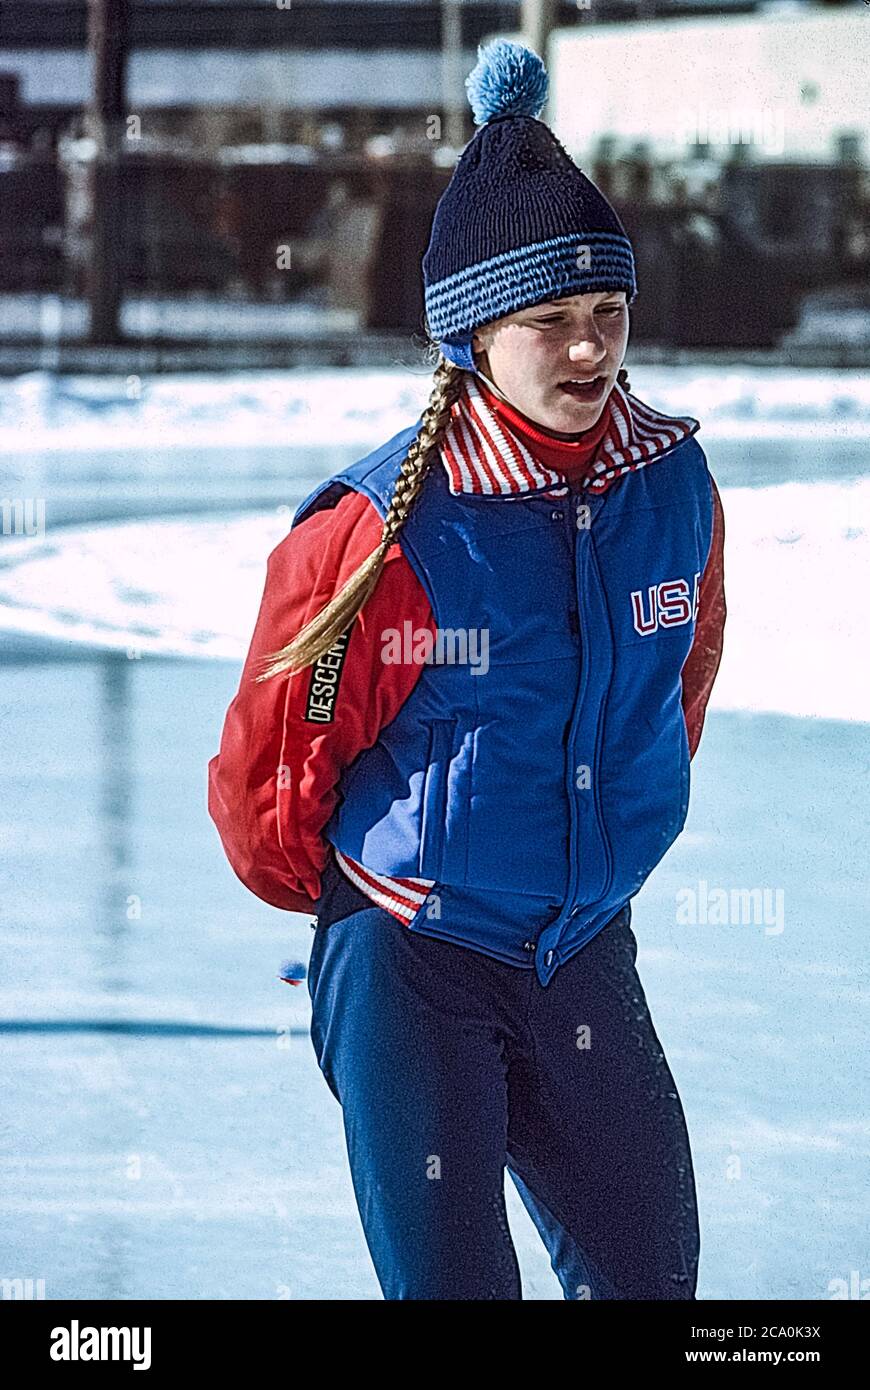 Speed skater Beth Heiden (USA) training at the Wisconsin Olympic Ice Rink in West Allis, Wisconsin prior to the 1980 Olympic Winter Games Stock Photo